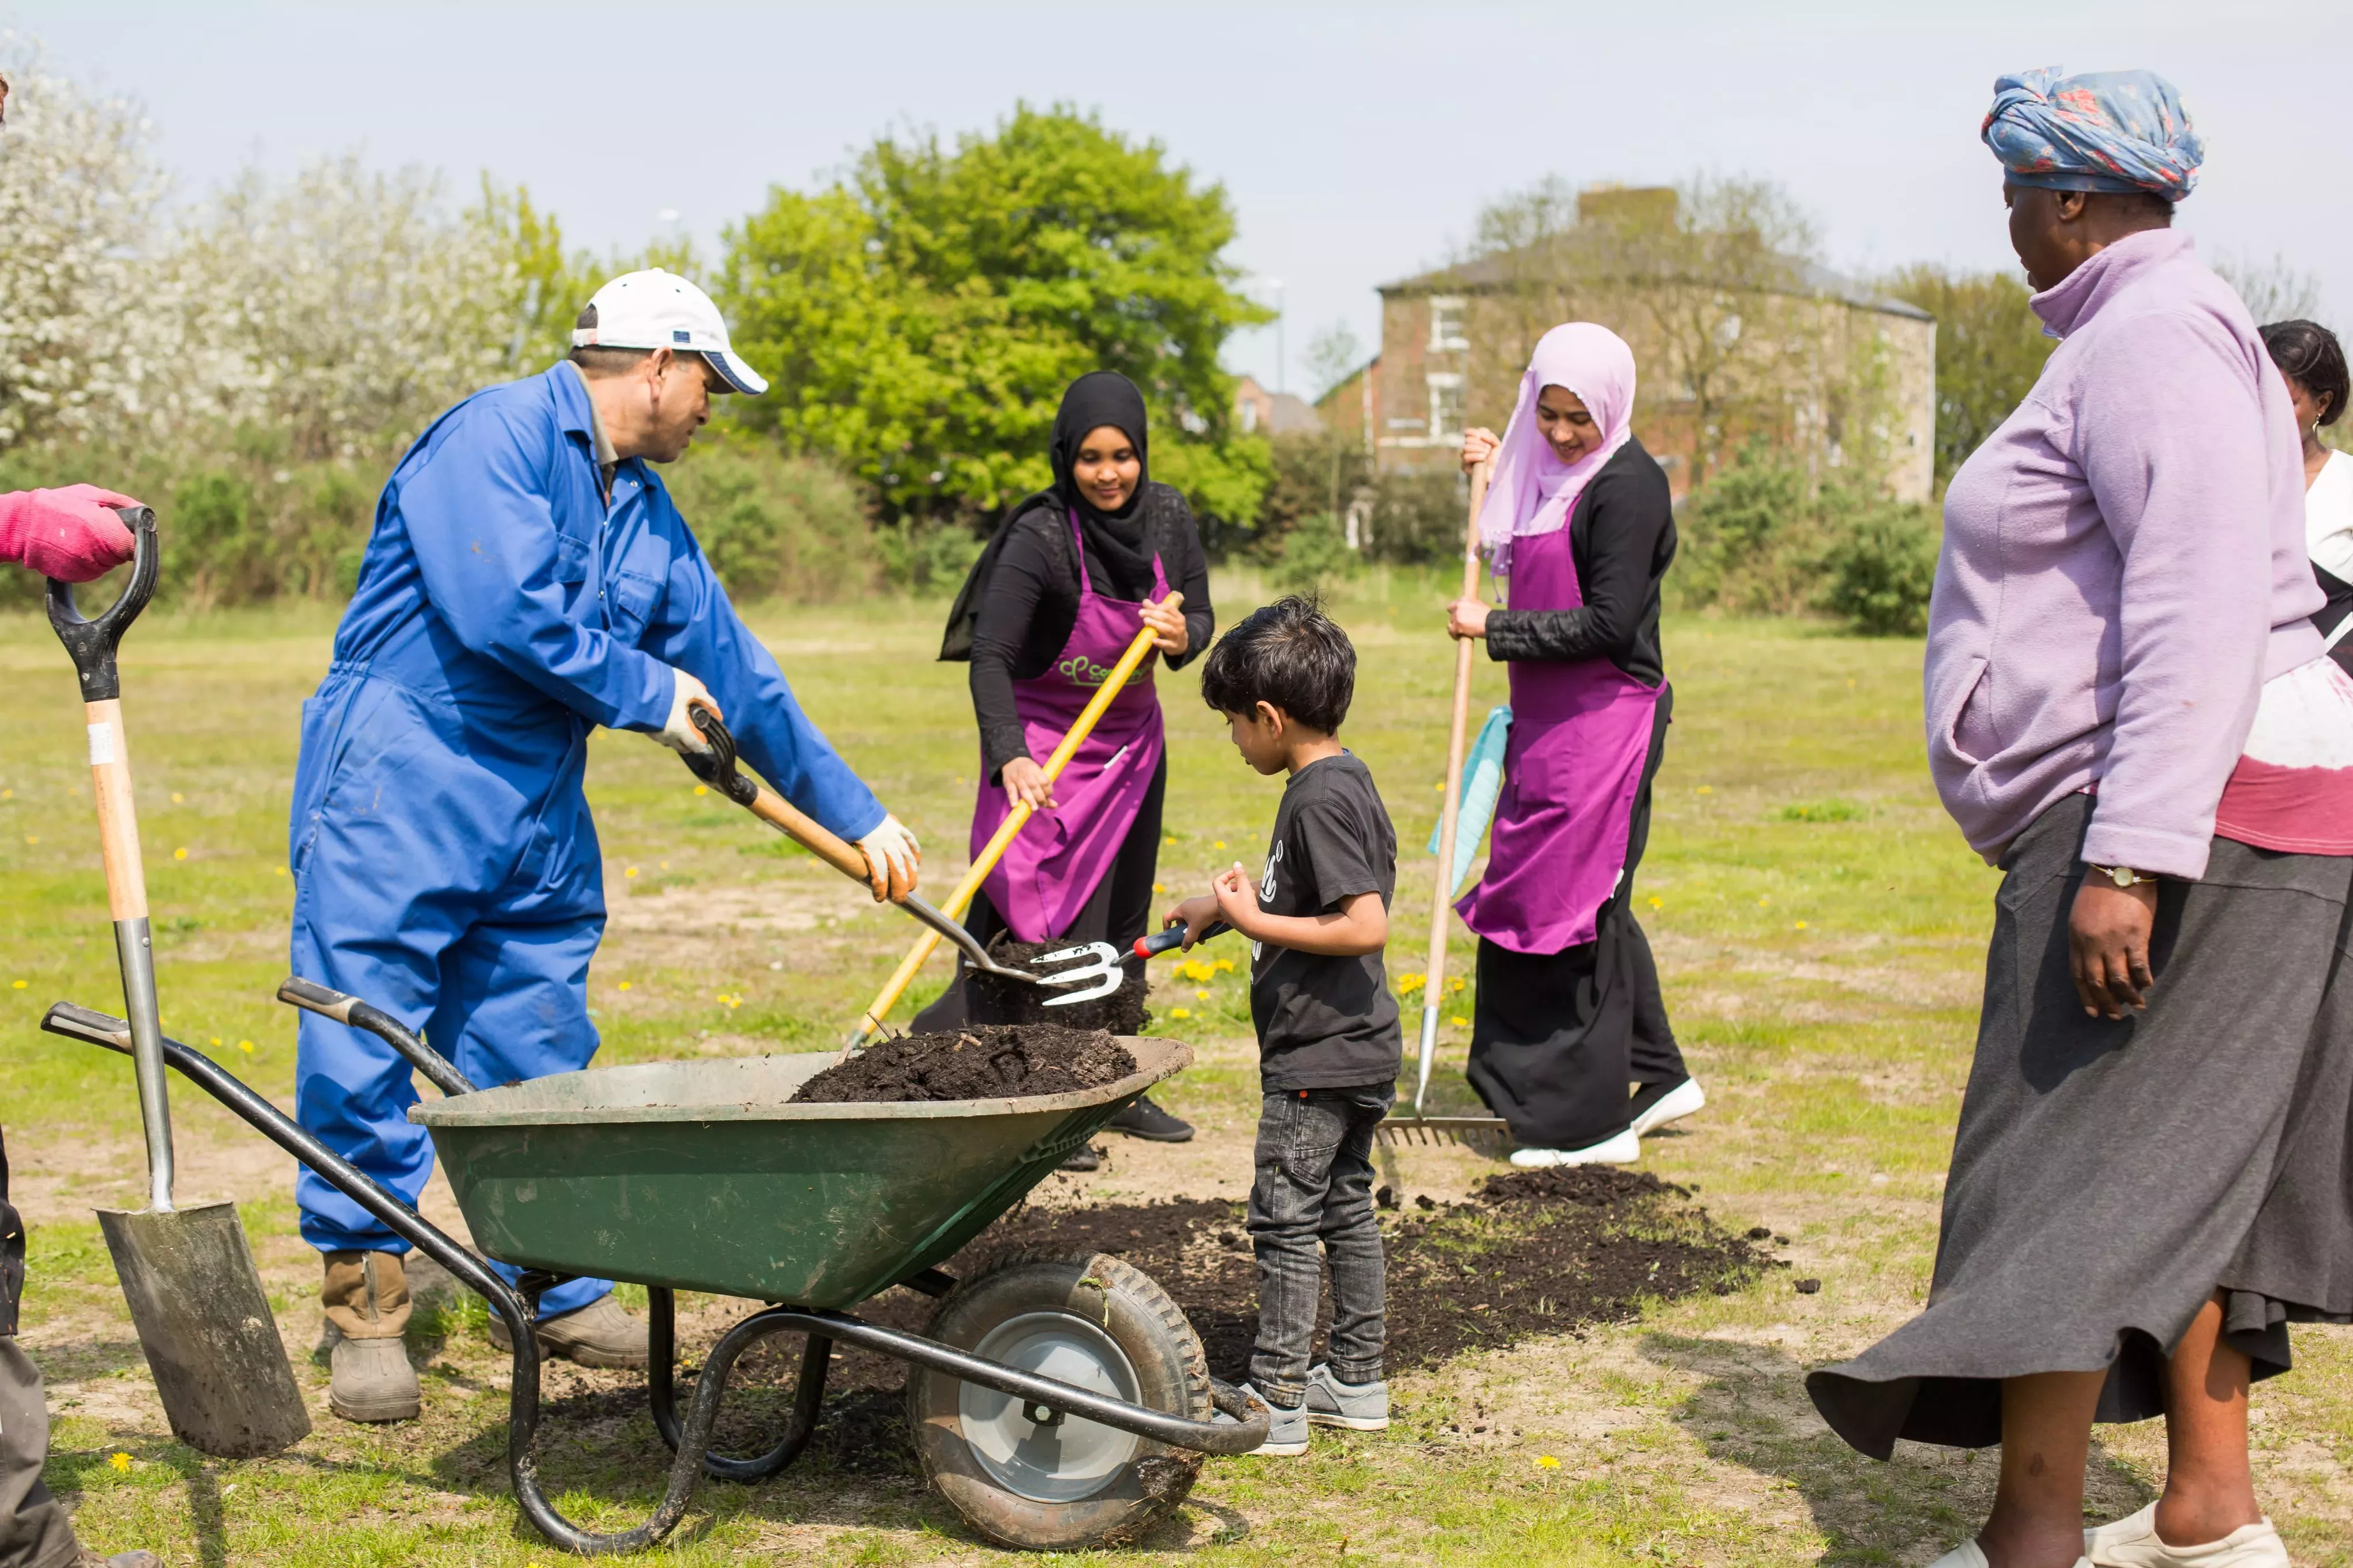 Women and children take part in an outreach project,putting soil into a wheelbarrow